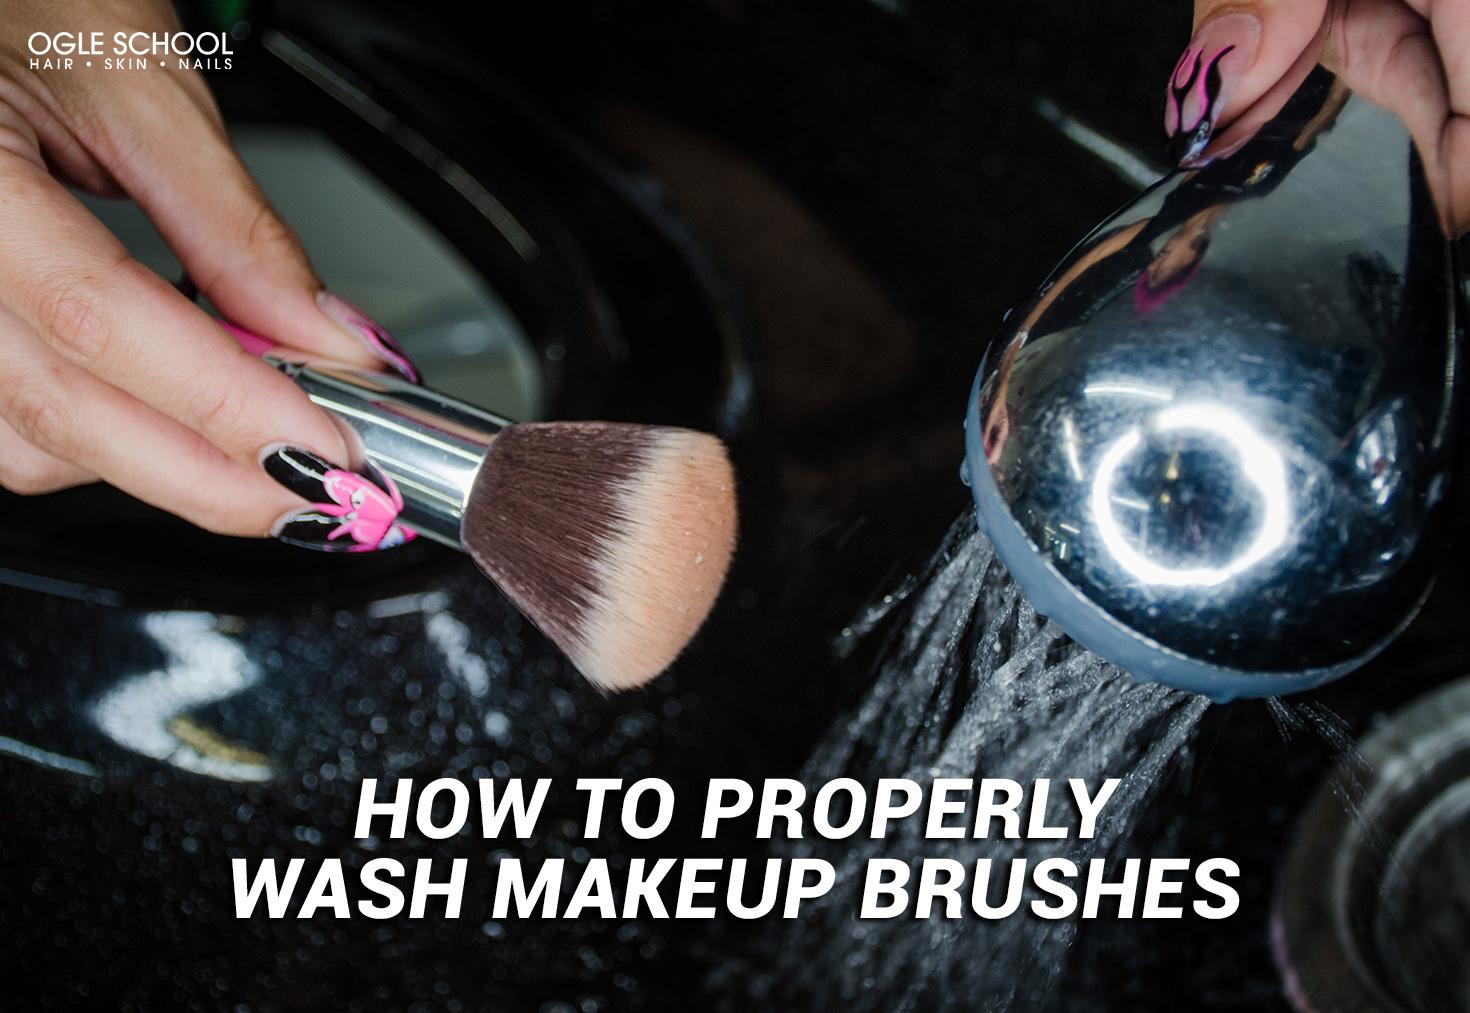 How To Properly Wash Different Types of Makeup Brushes